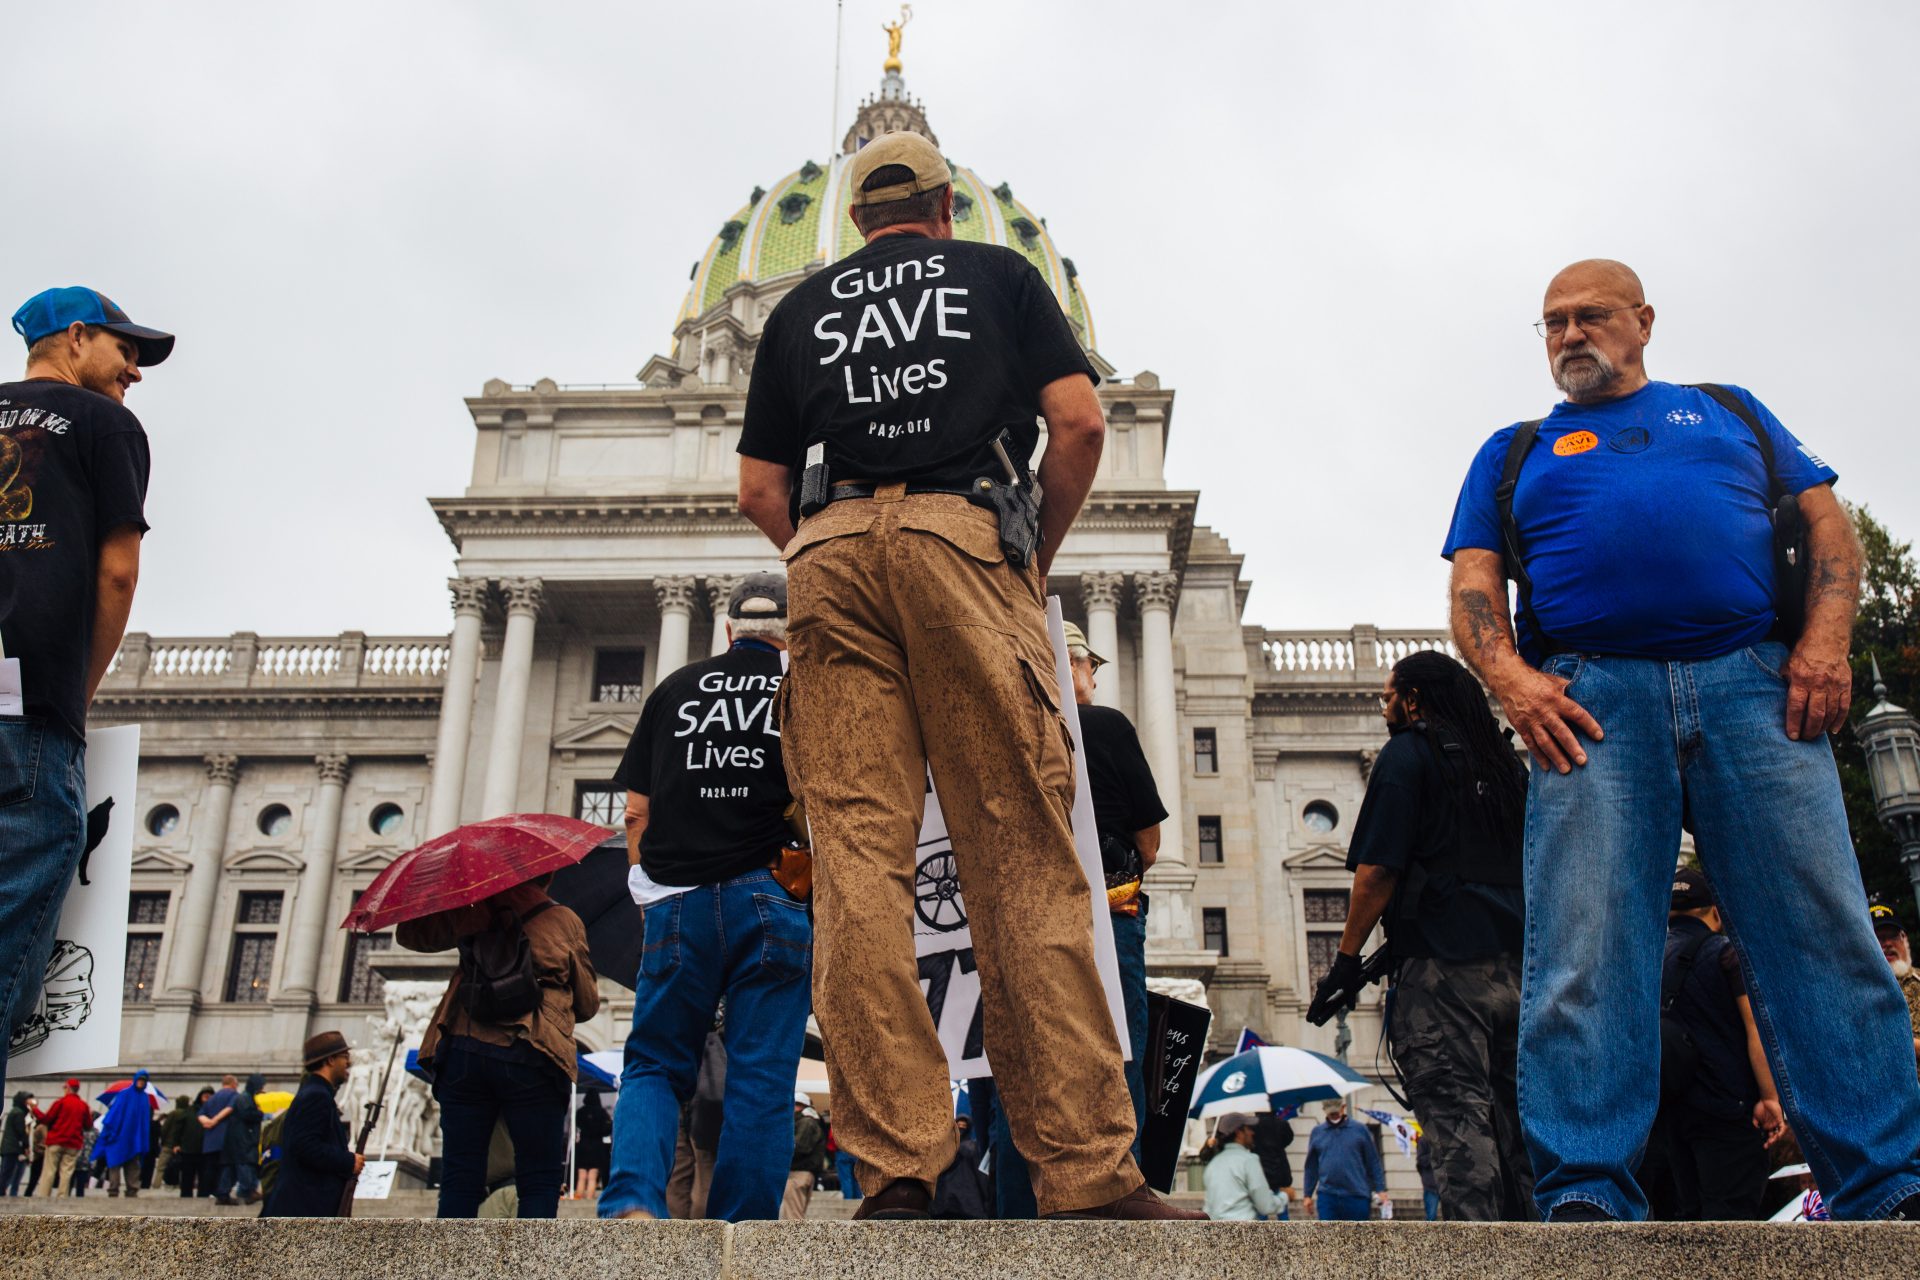 2nd Amendment Rally attendees carry guns and signs on the Capitol steps in Harrisburg, Pa., on September 29, 2020.